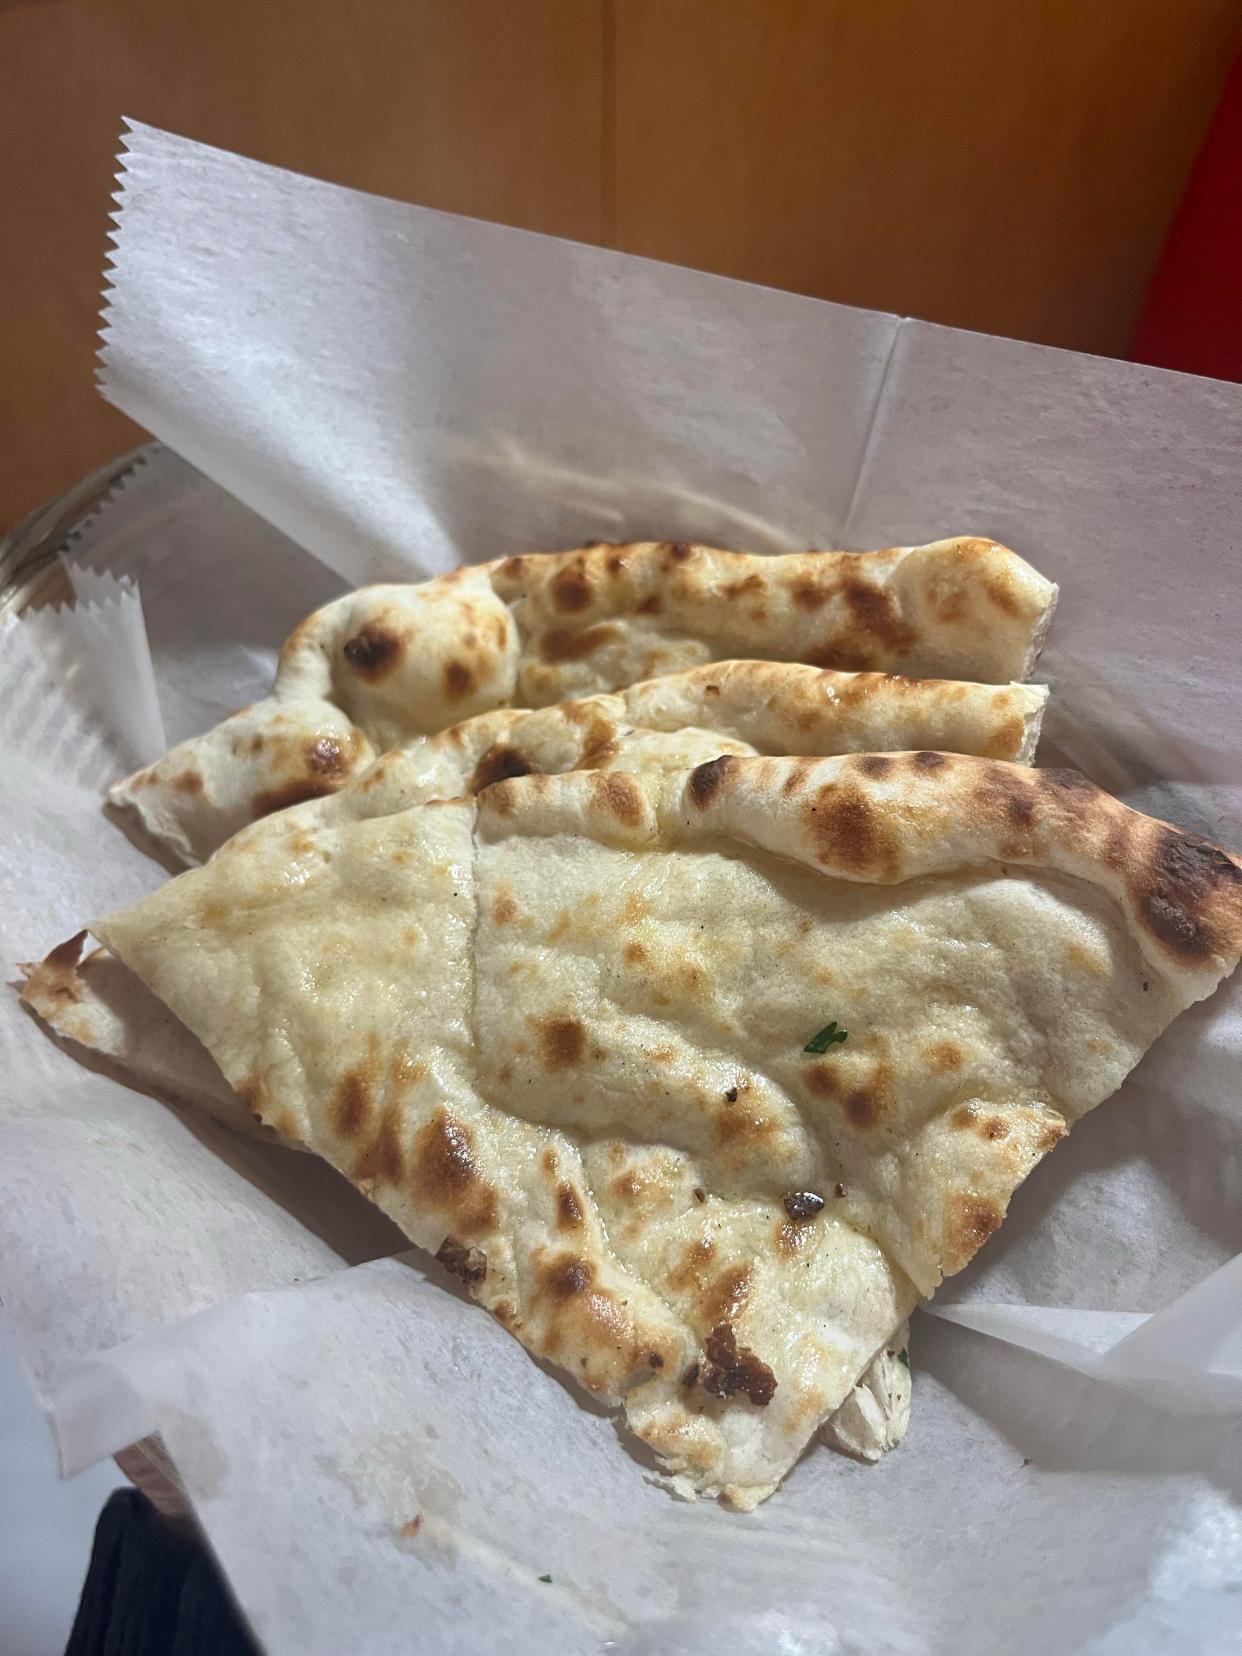 Naan is leavened white bread baked in a tandoor at The Spice Delight in Munroe Falls.